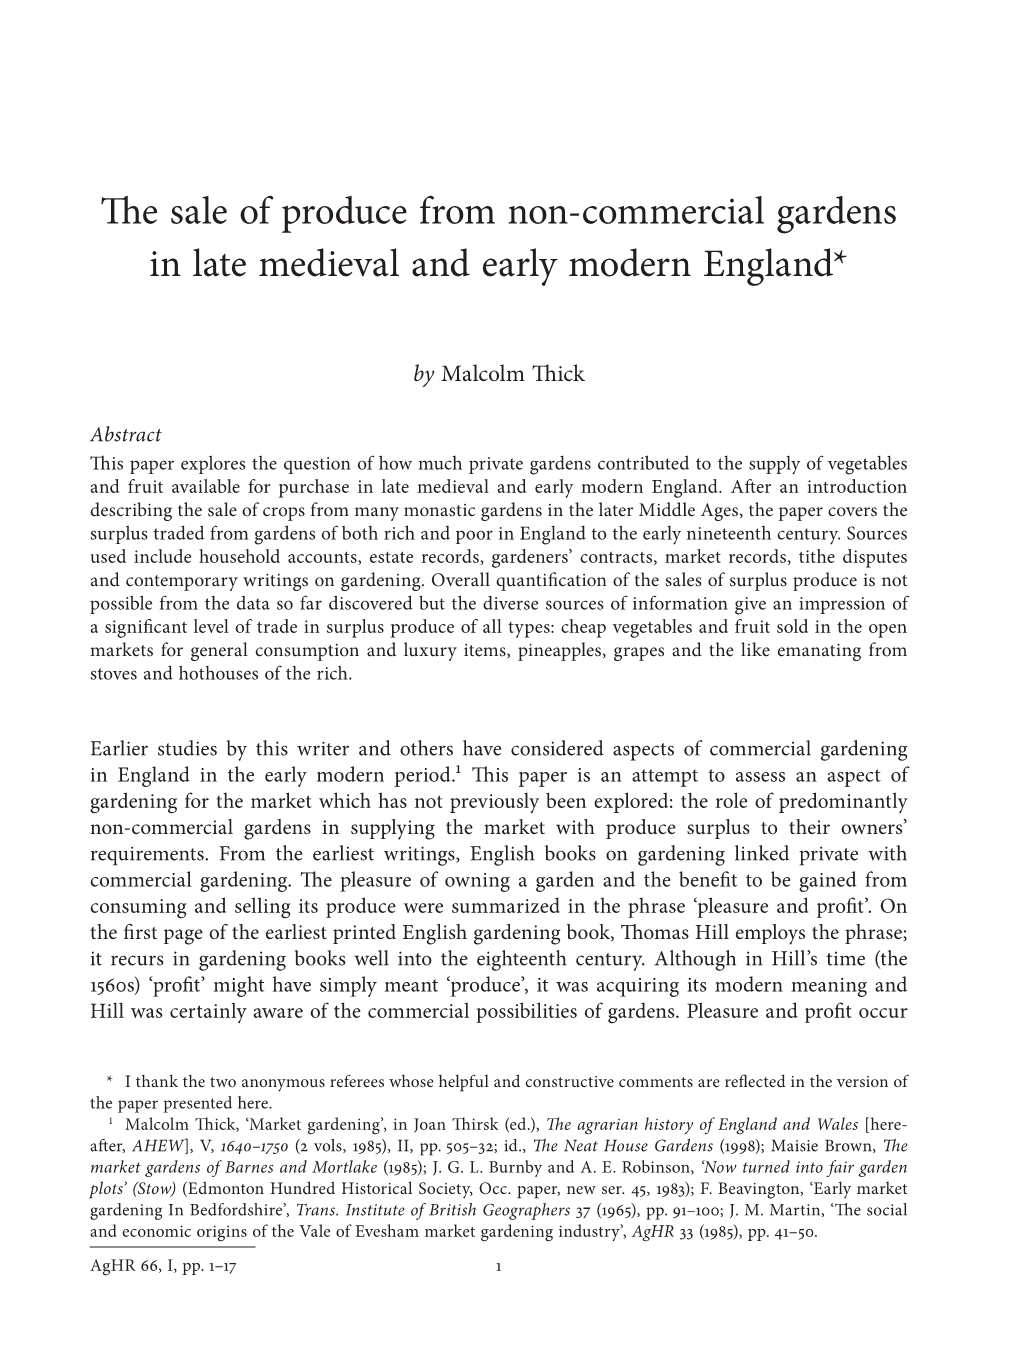 The Sale of Produce from Non-Commercial Gardens in Late Medieval and Early Modern England*